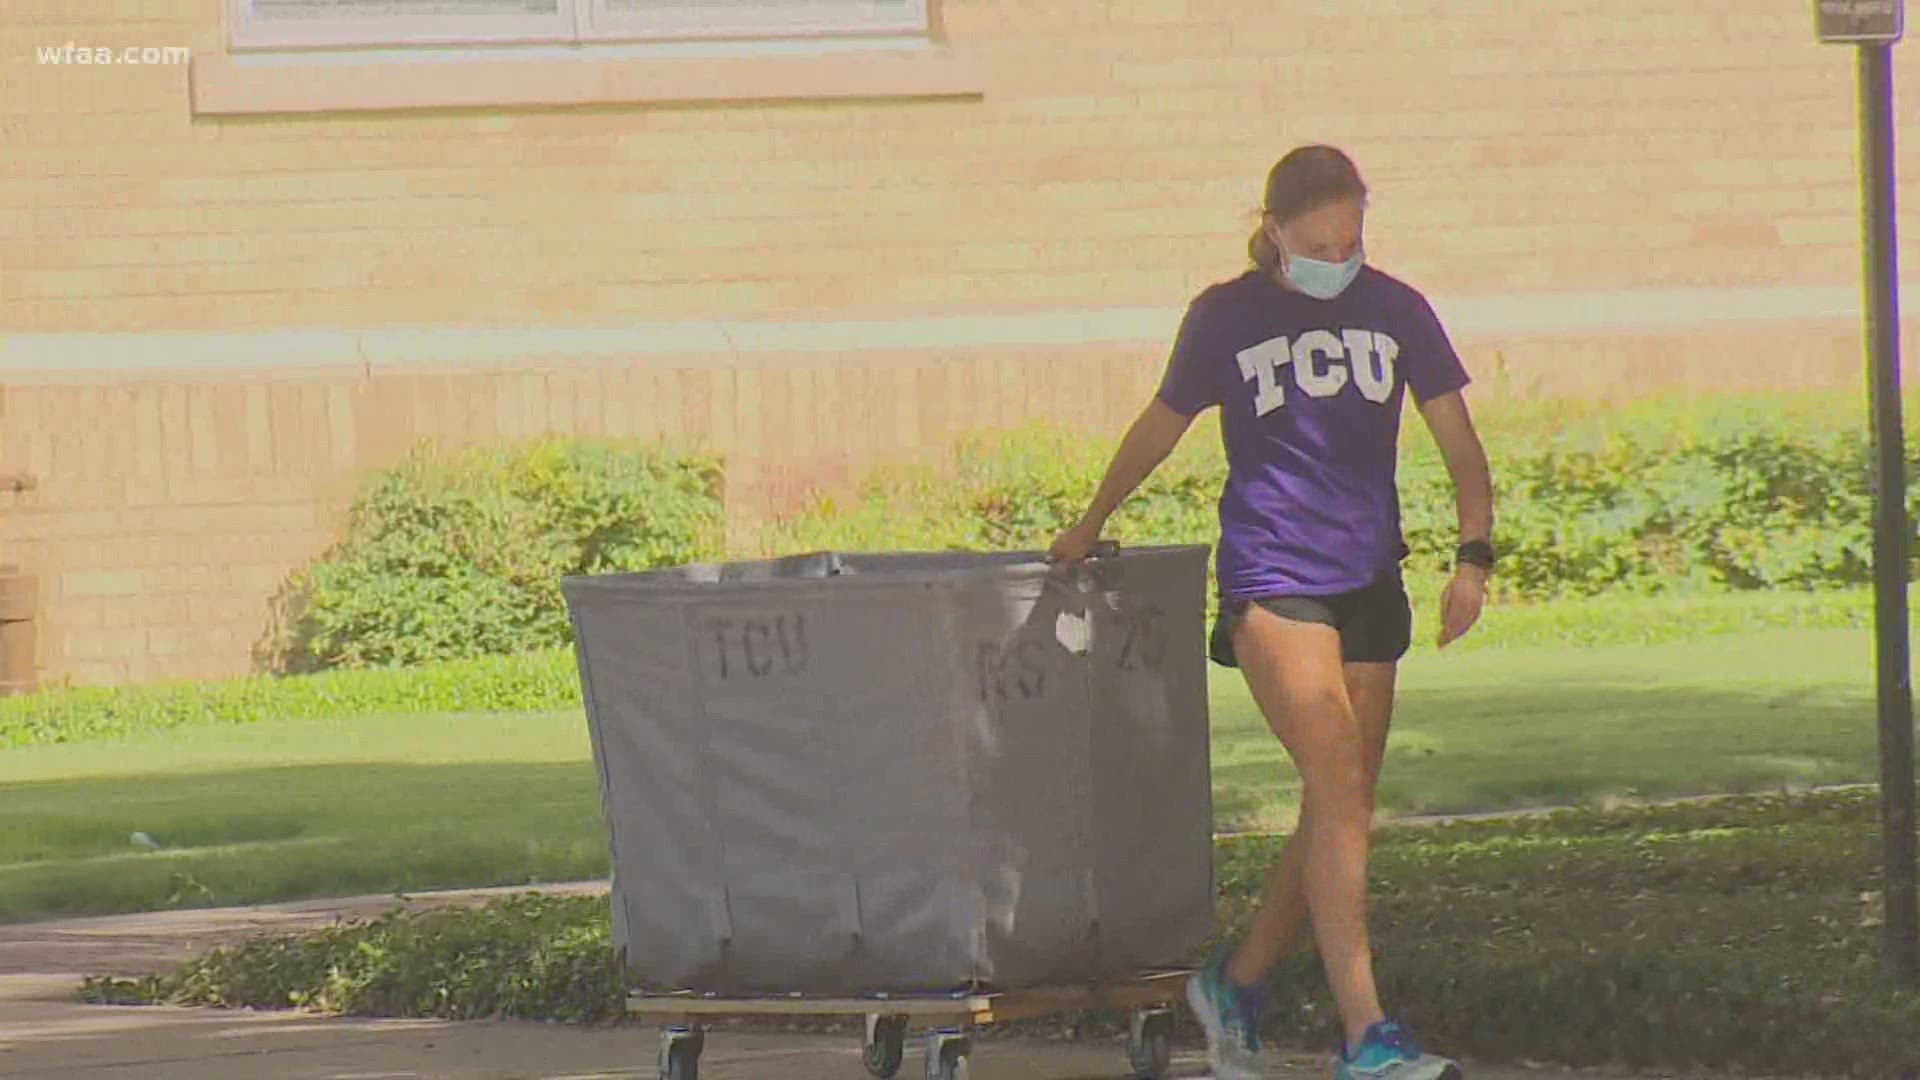 Students started moving on campus at Texas Christian University. College move-ins look a little different during the pandemic.